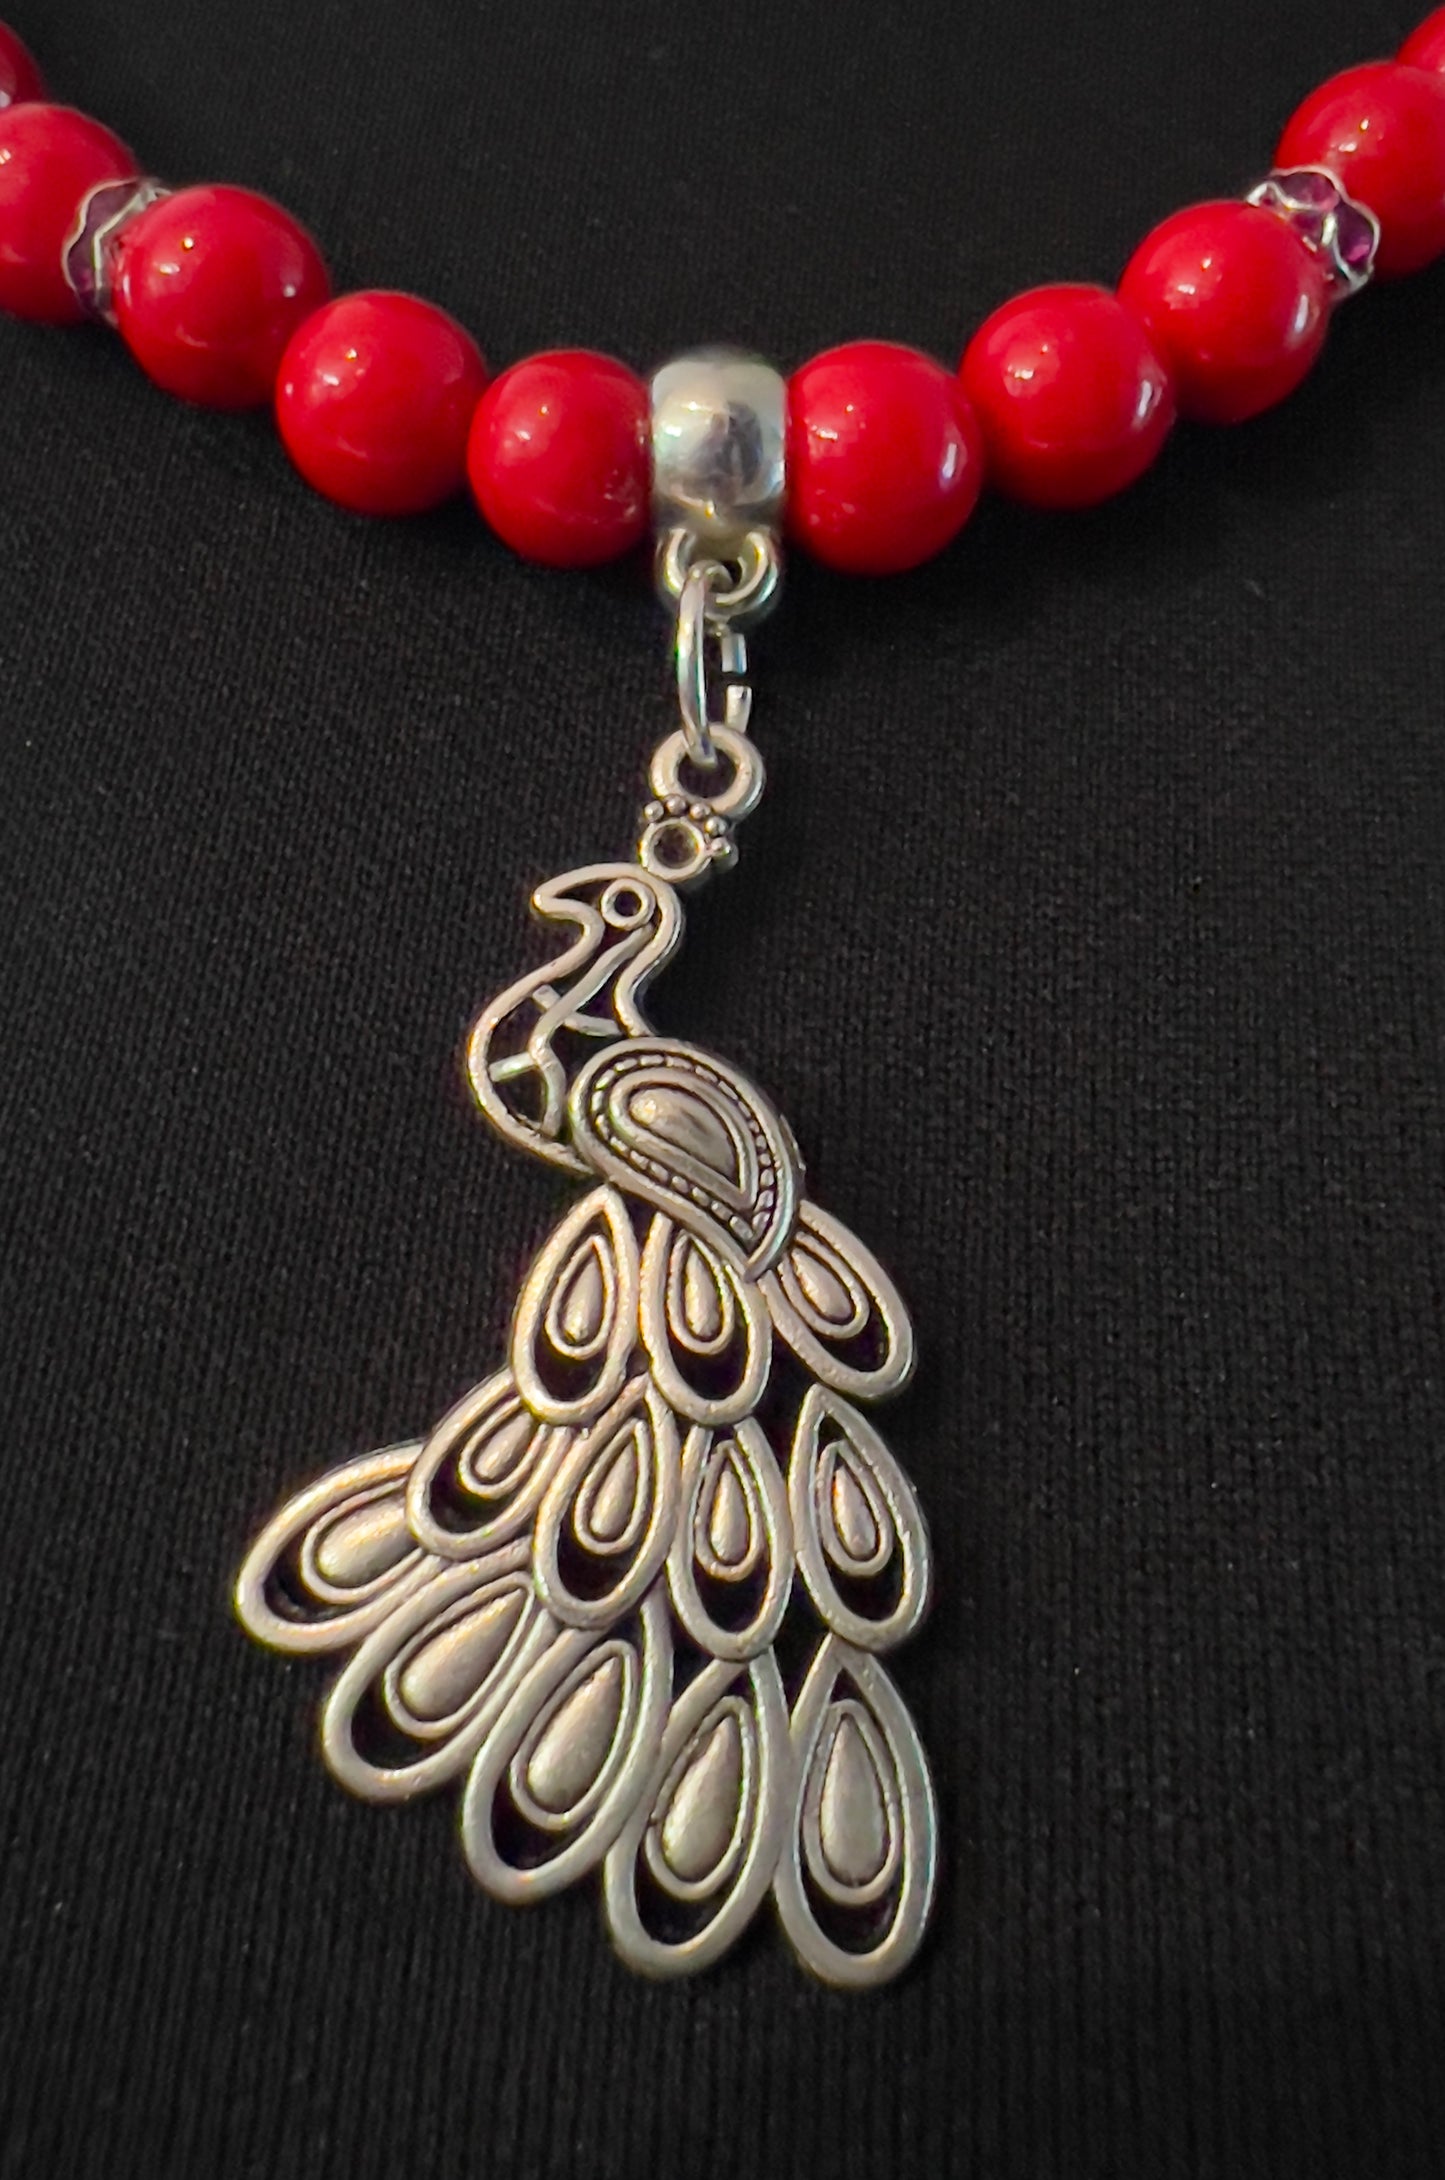 Red Agate Necklace with Peacock Pendant